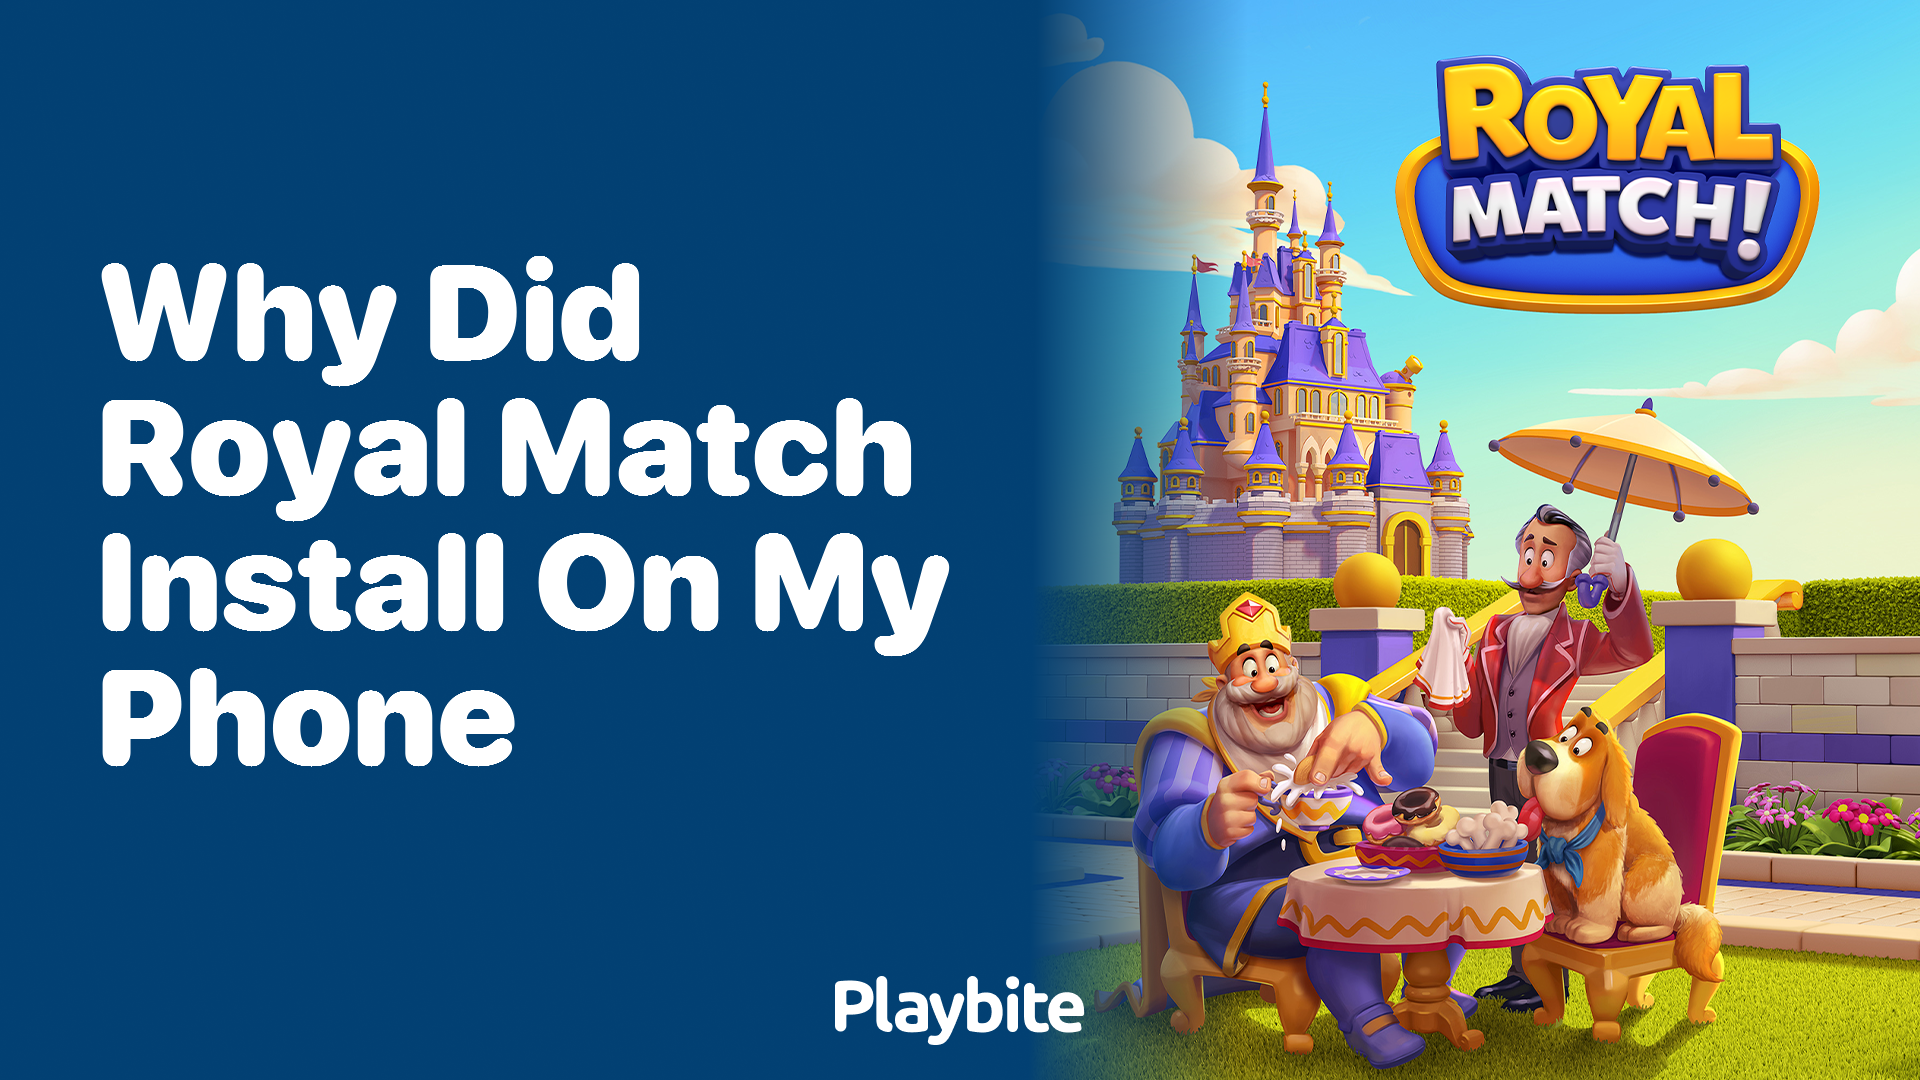 Why Did Royal Match Install on My Phone?